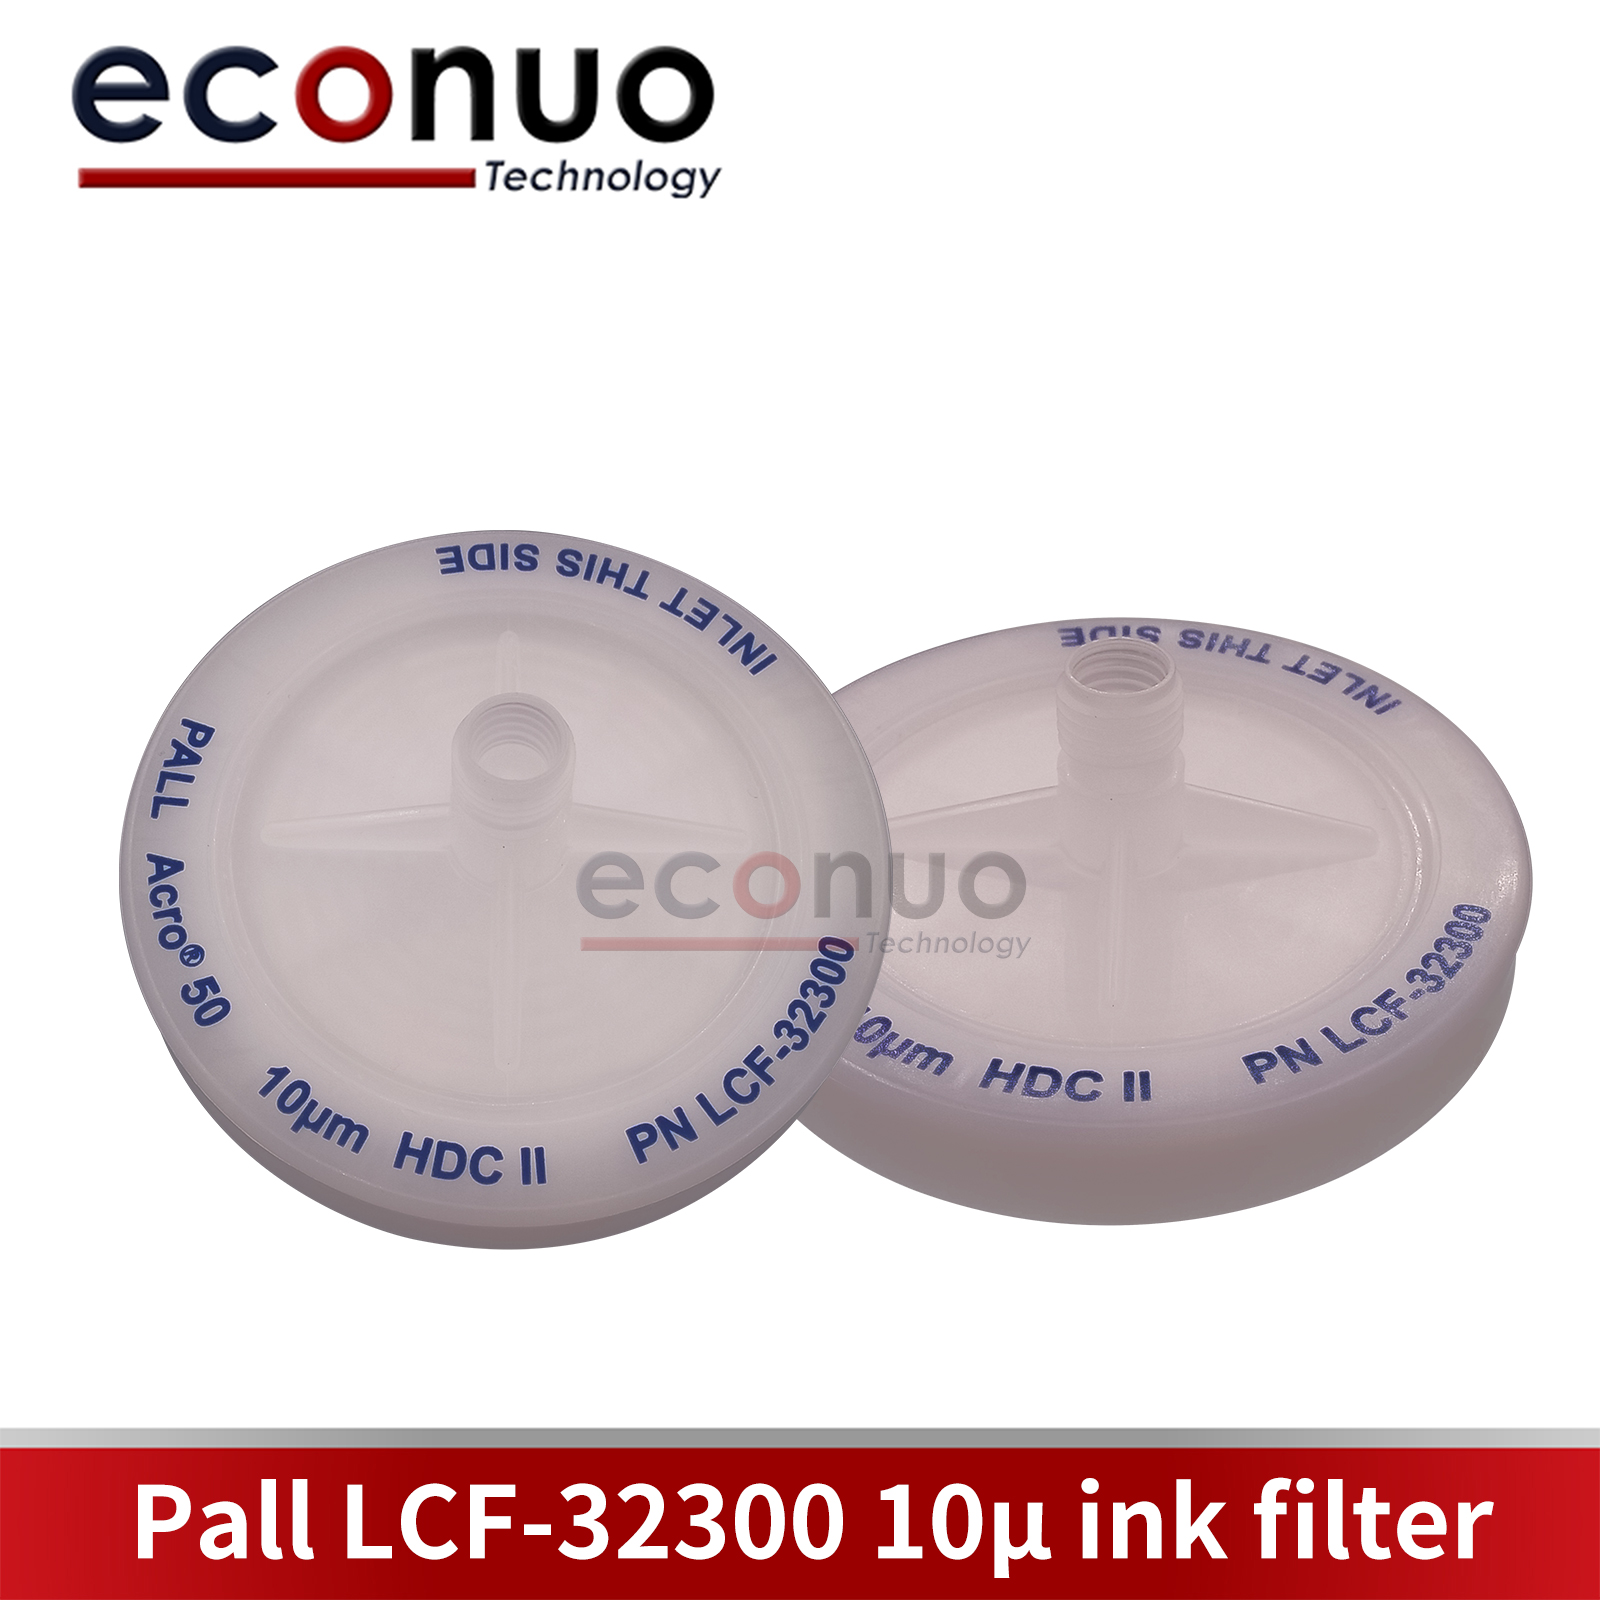 E2049 Pall LCF-32300 10μ ink filter